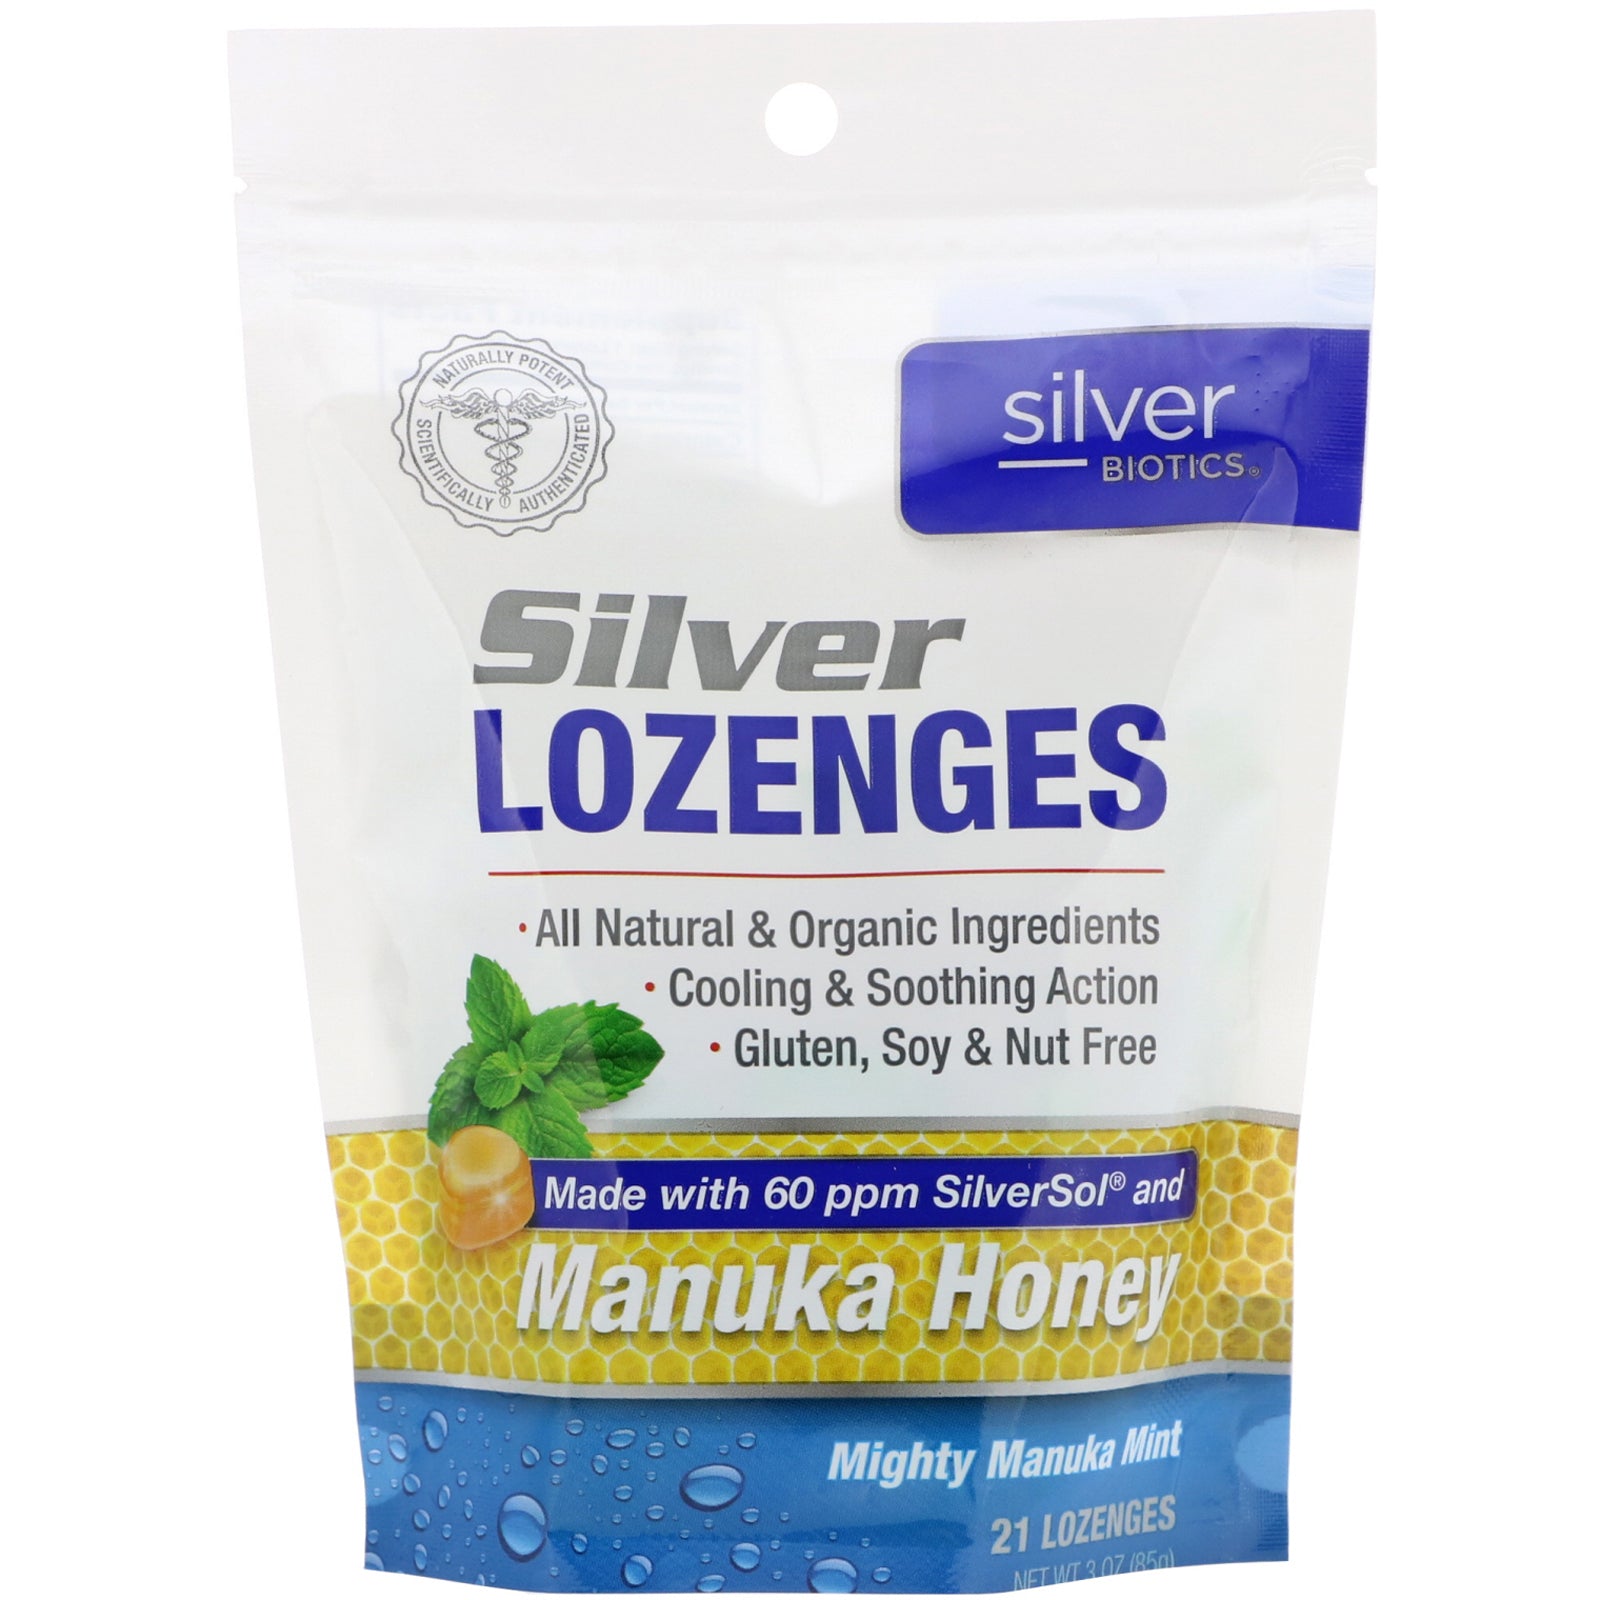 American Biotech Labs, Silver Biotics, Silver Lozenges, 60 PPM SilverSol, Mighty Manuka Mint, 21 Lozenges